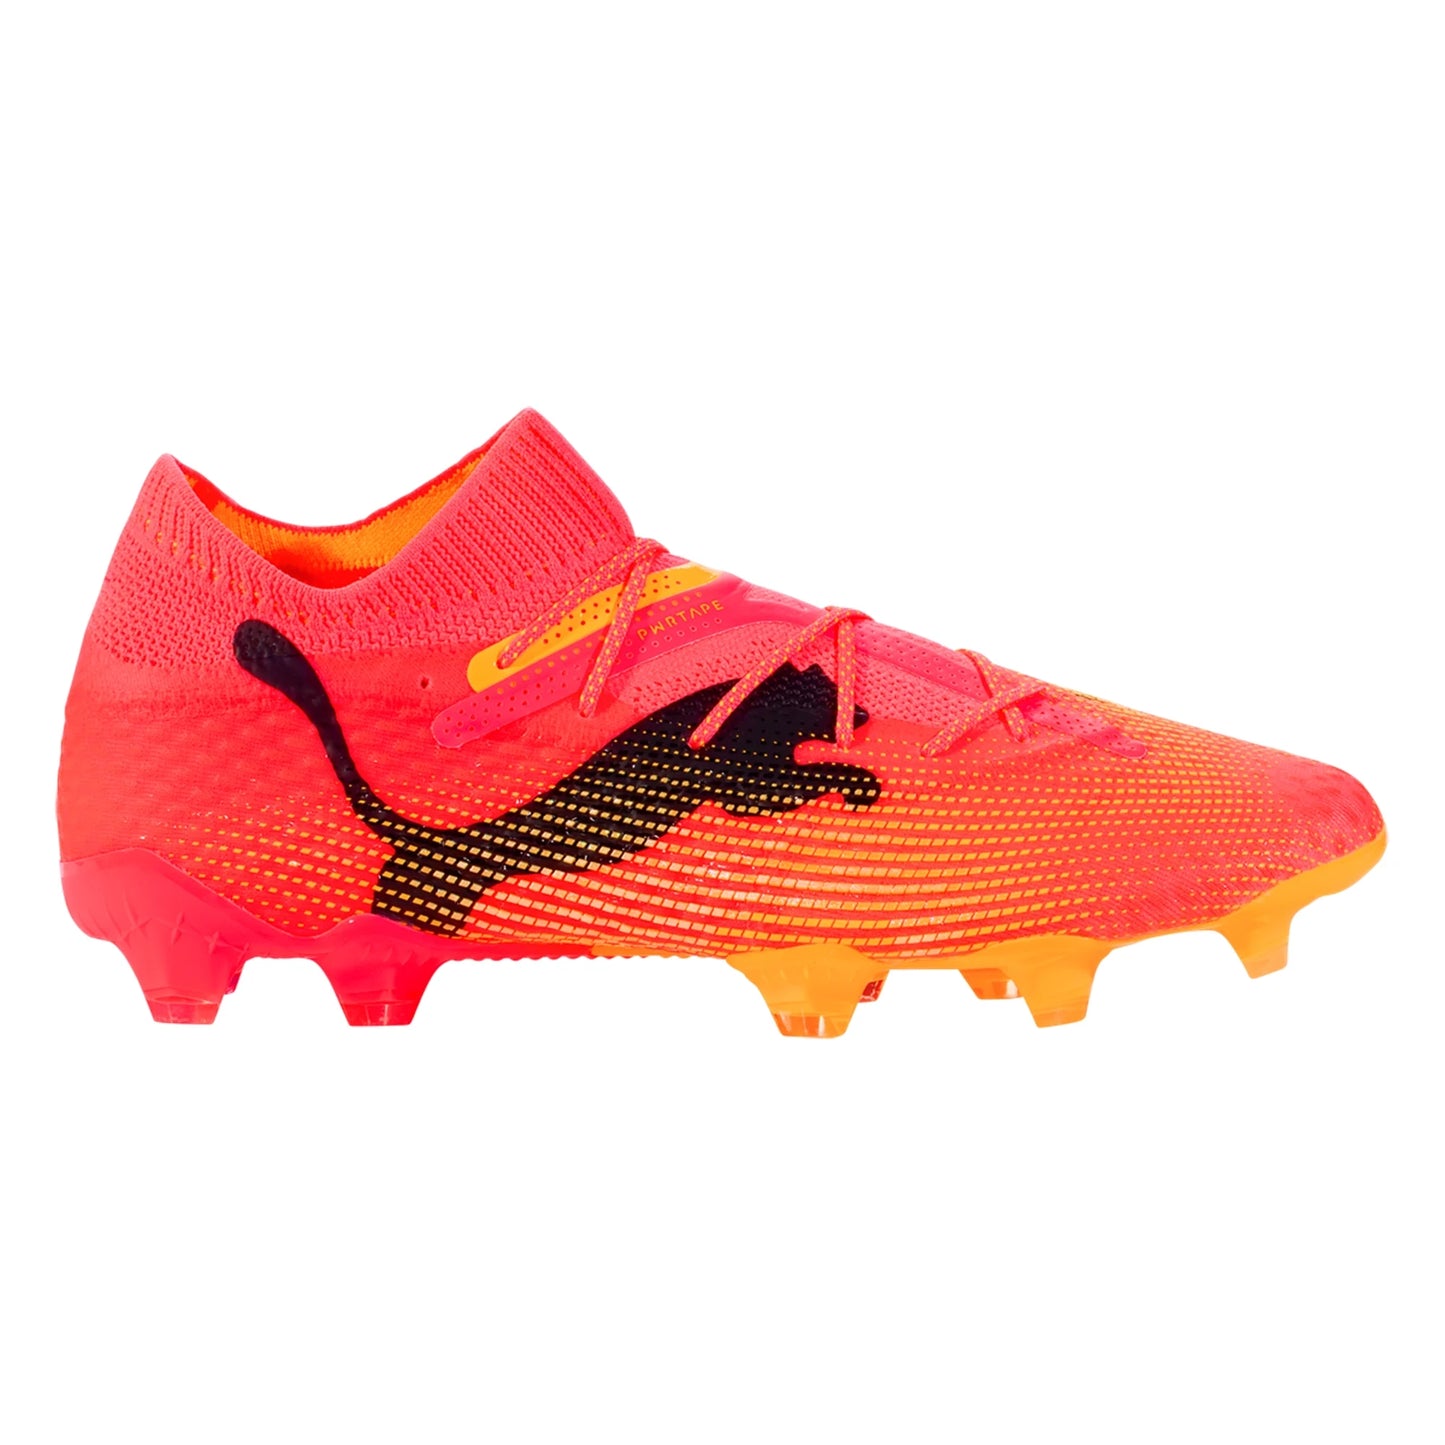 Puma Future 7 Ultimate FG/AG Firm Ground Soccer Cleat